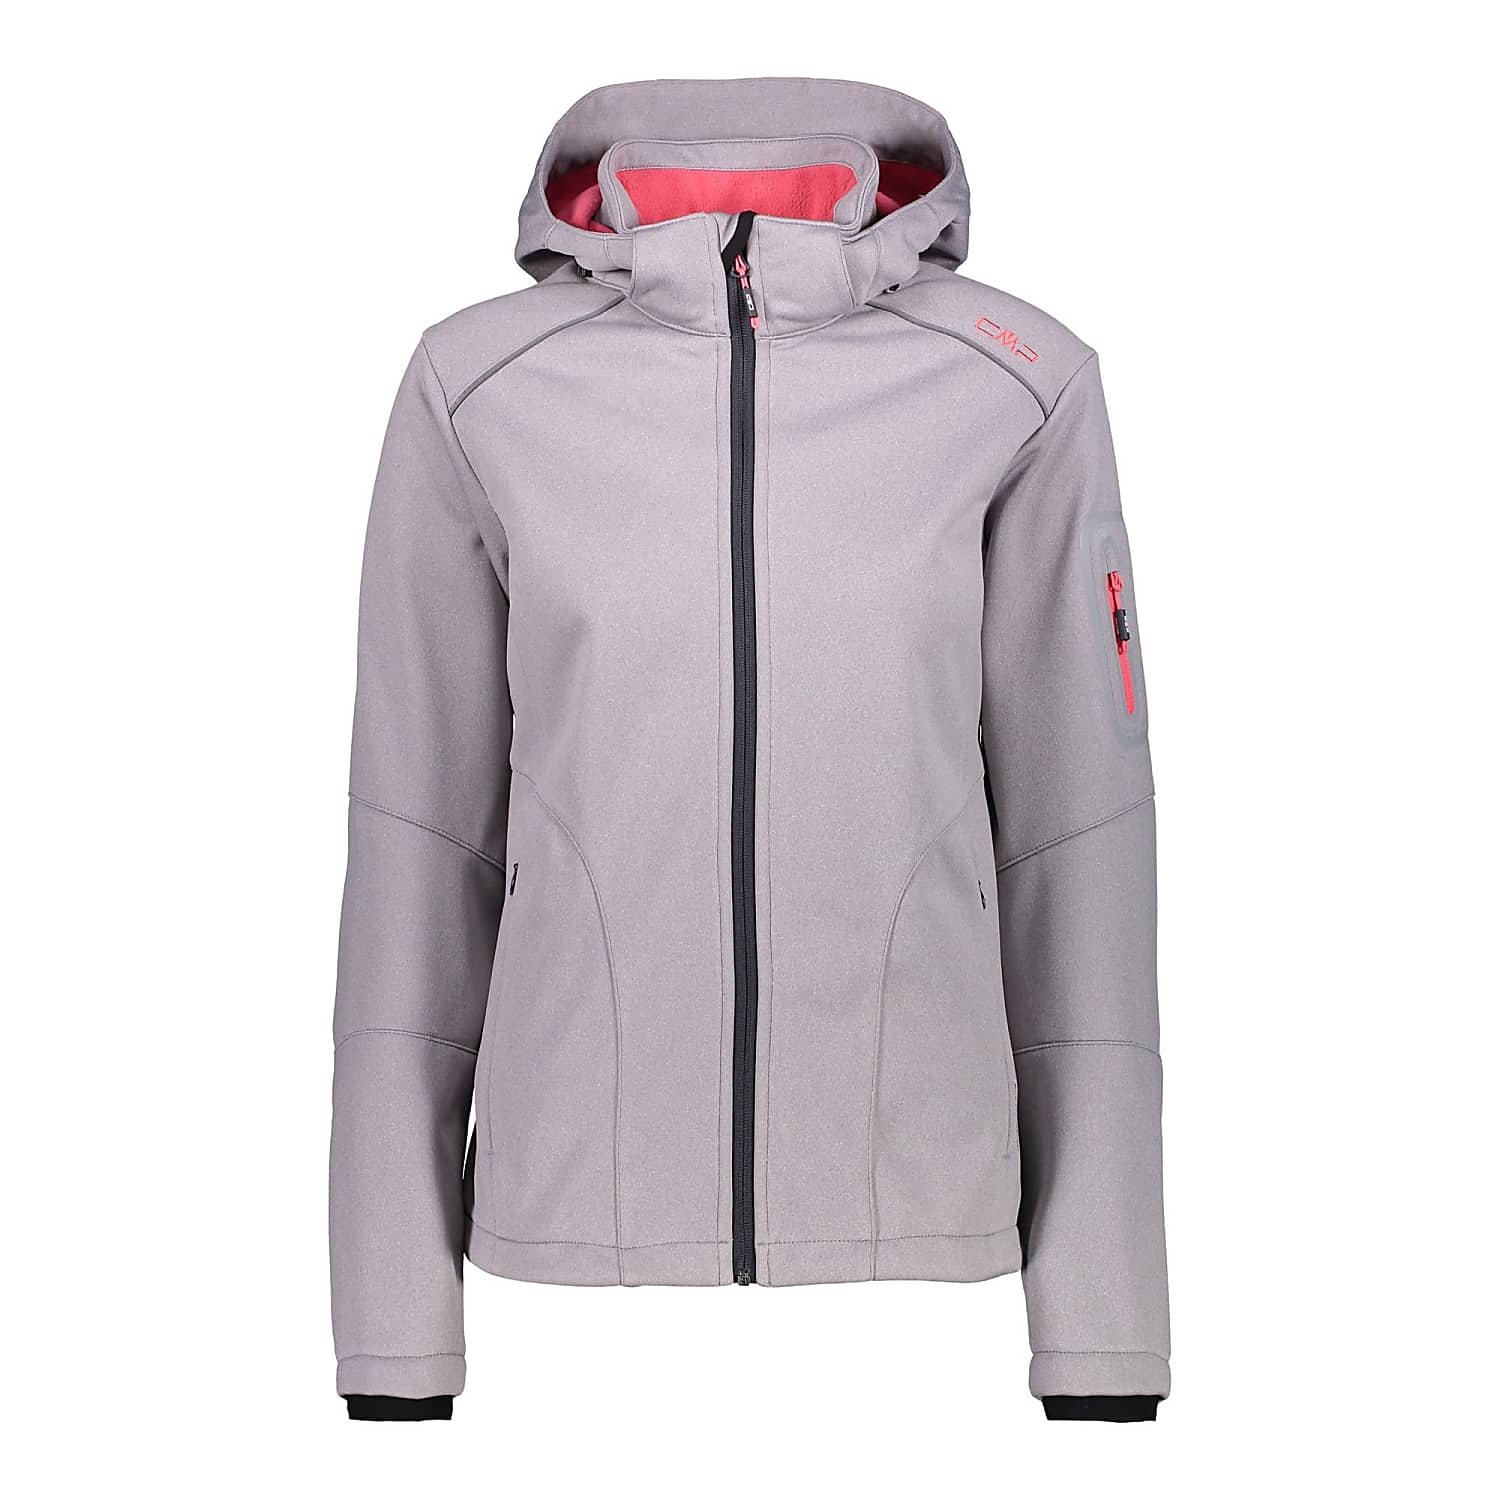 CMP W JACKET ZIP shipping SOFTSHELL, Corallo and Argento cheap Mel. - - HOOD Fast